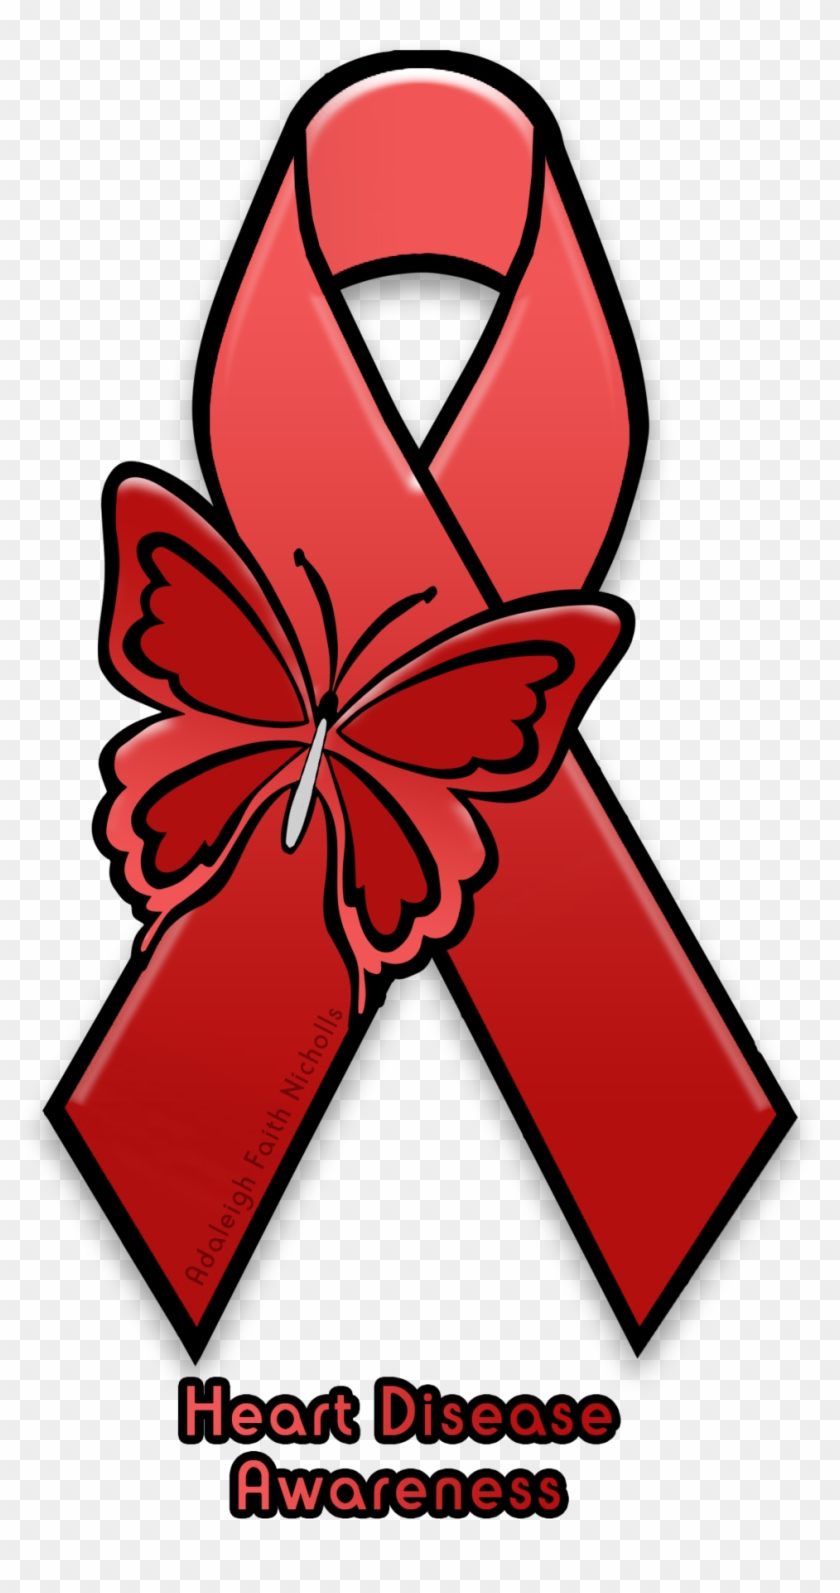 Heart Disease Awareness Ribbon By Adaleighfaith On - Mental Health Green Ribbon Png #333624